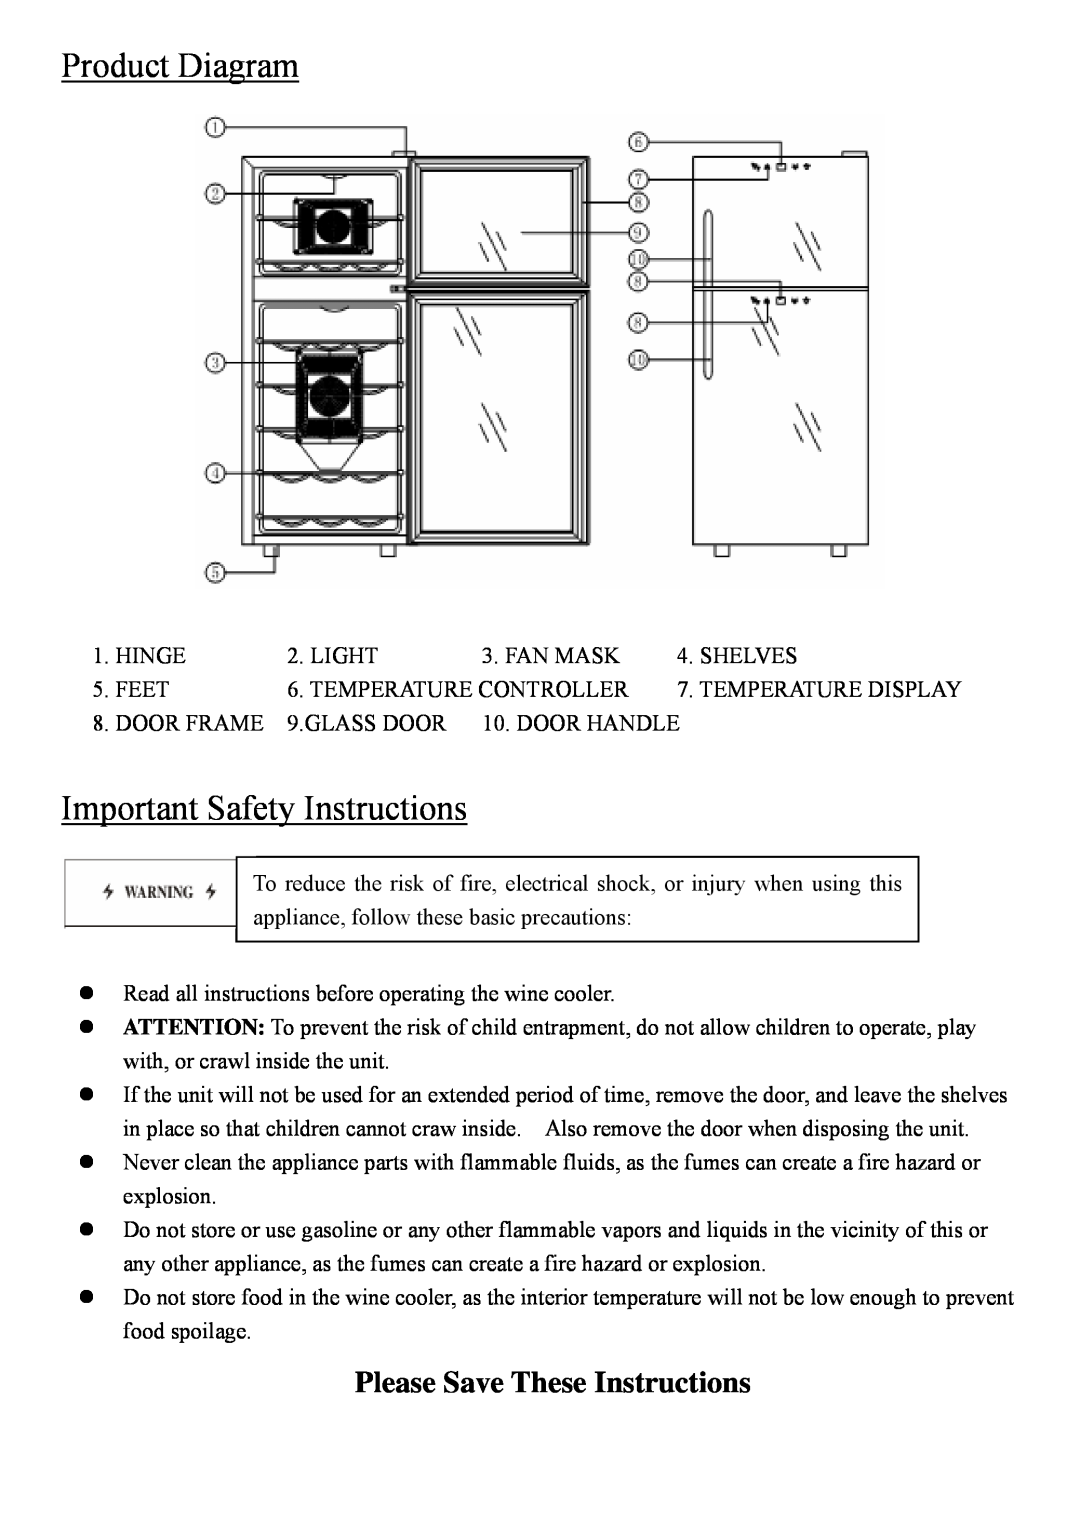 NewAir AW-210ED instruction manual Product Diagram, Important Safety Instructions, Please Save These Instructions 